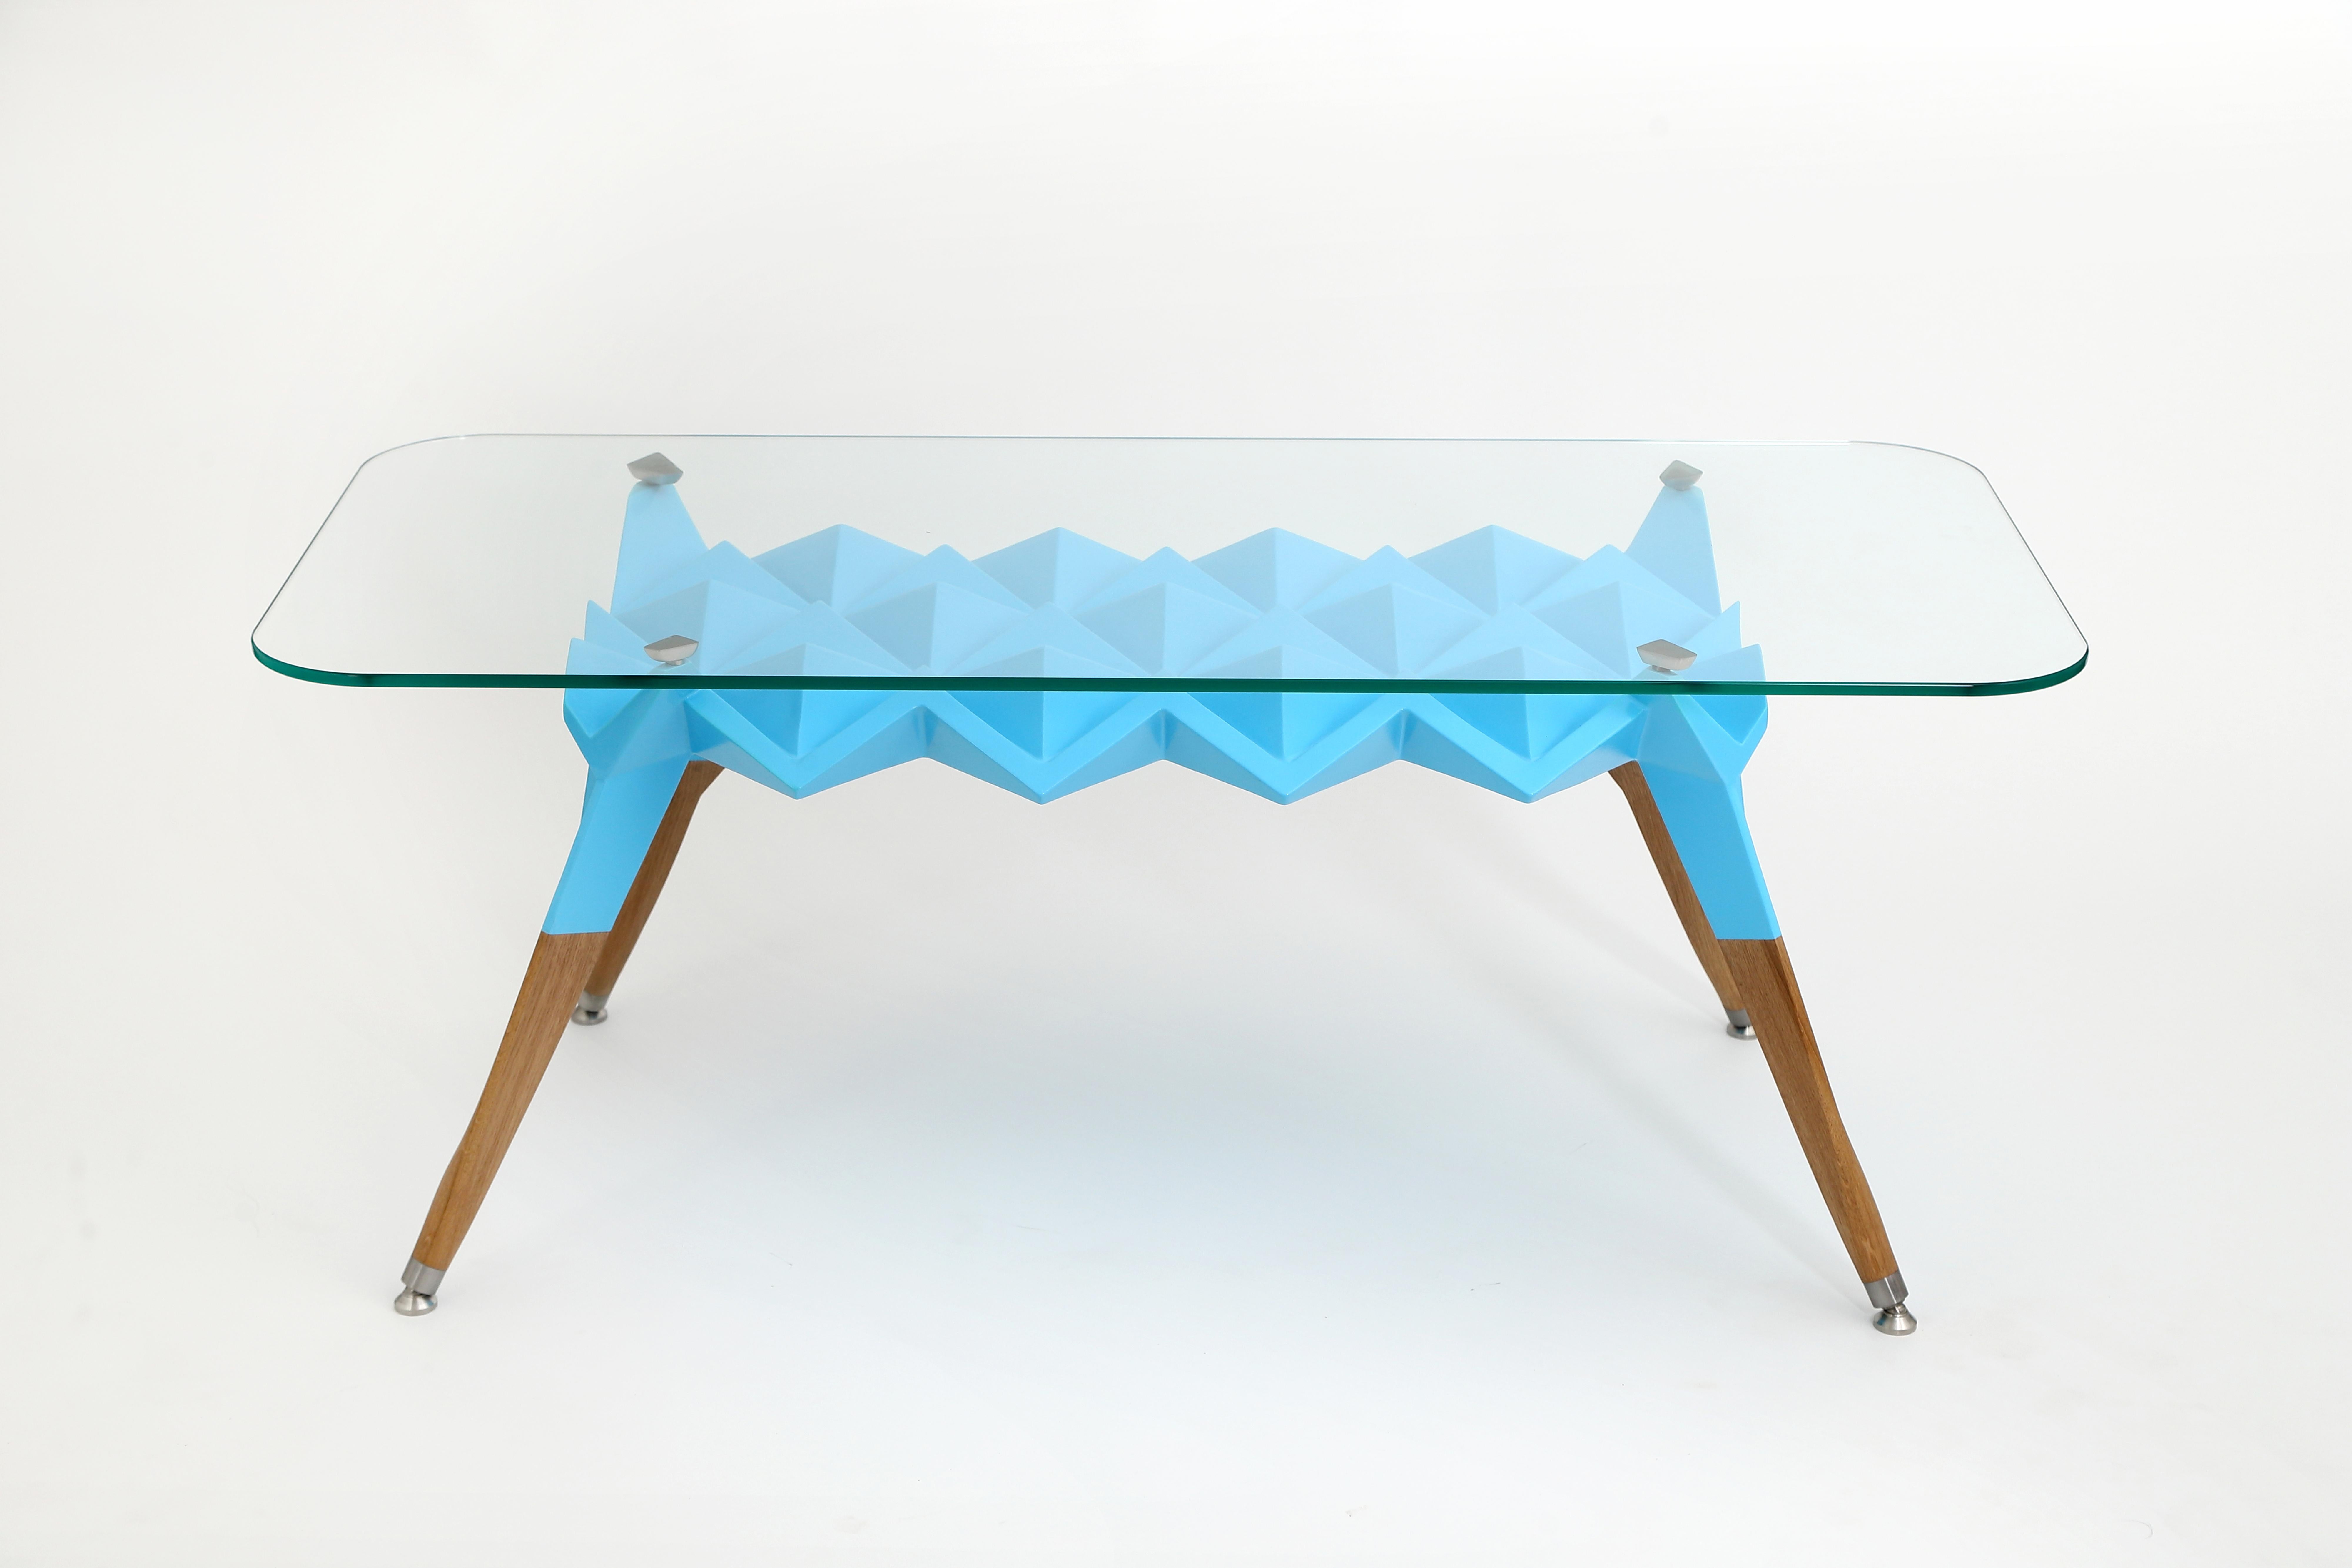 The body of the table is made of geometric, mostly triangular shapes in connection with legs made of old oak wood. The board is made of tempered glass and other additional elements, such as adjustable legs, are made of stainless steel.
   